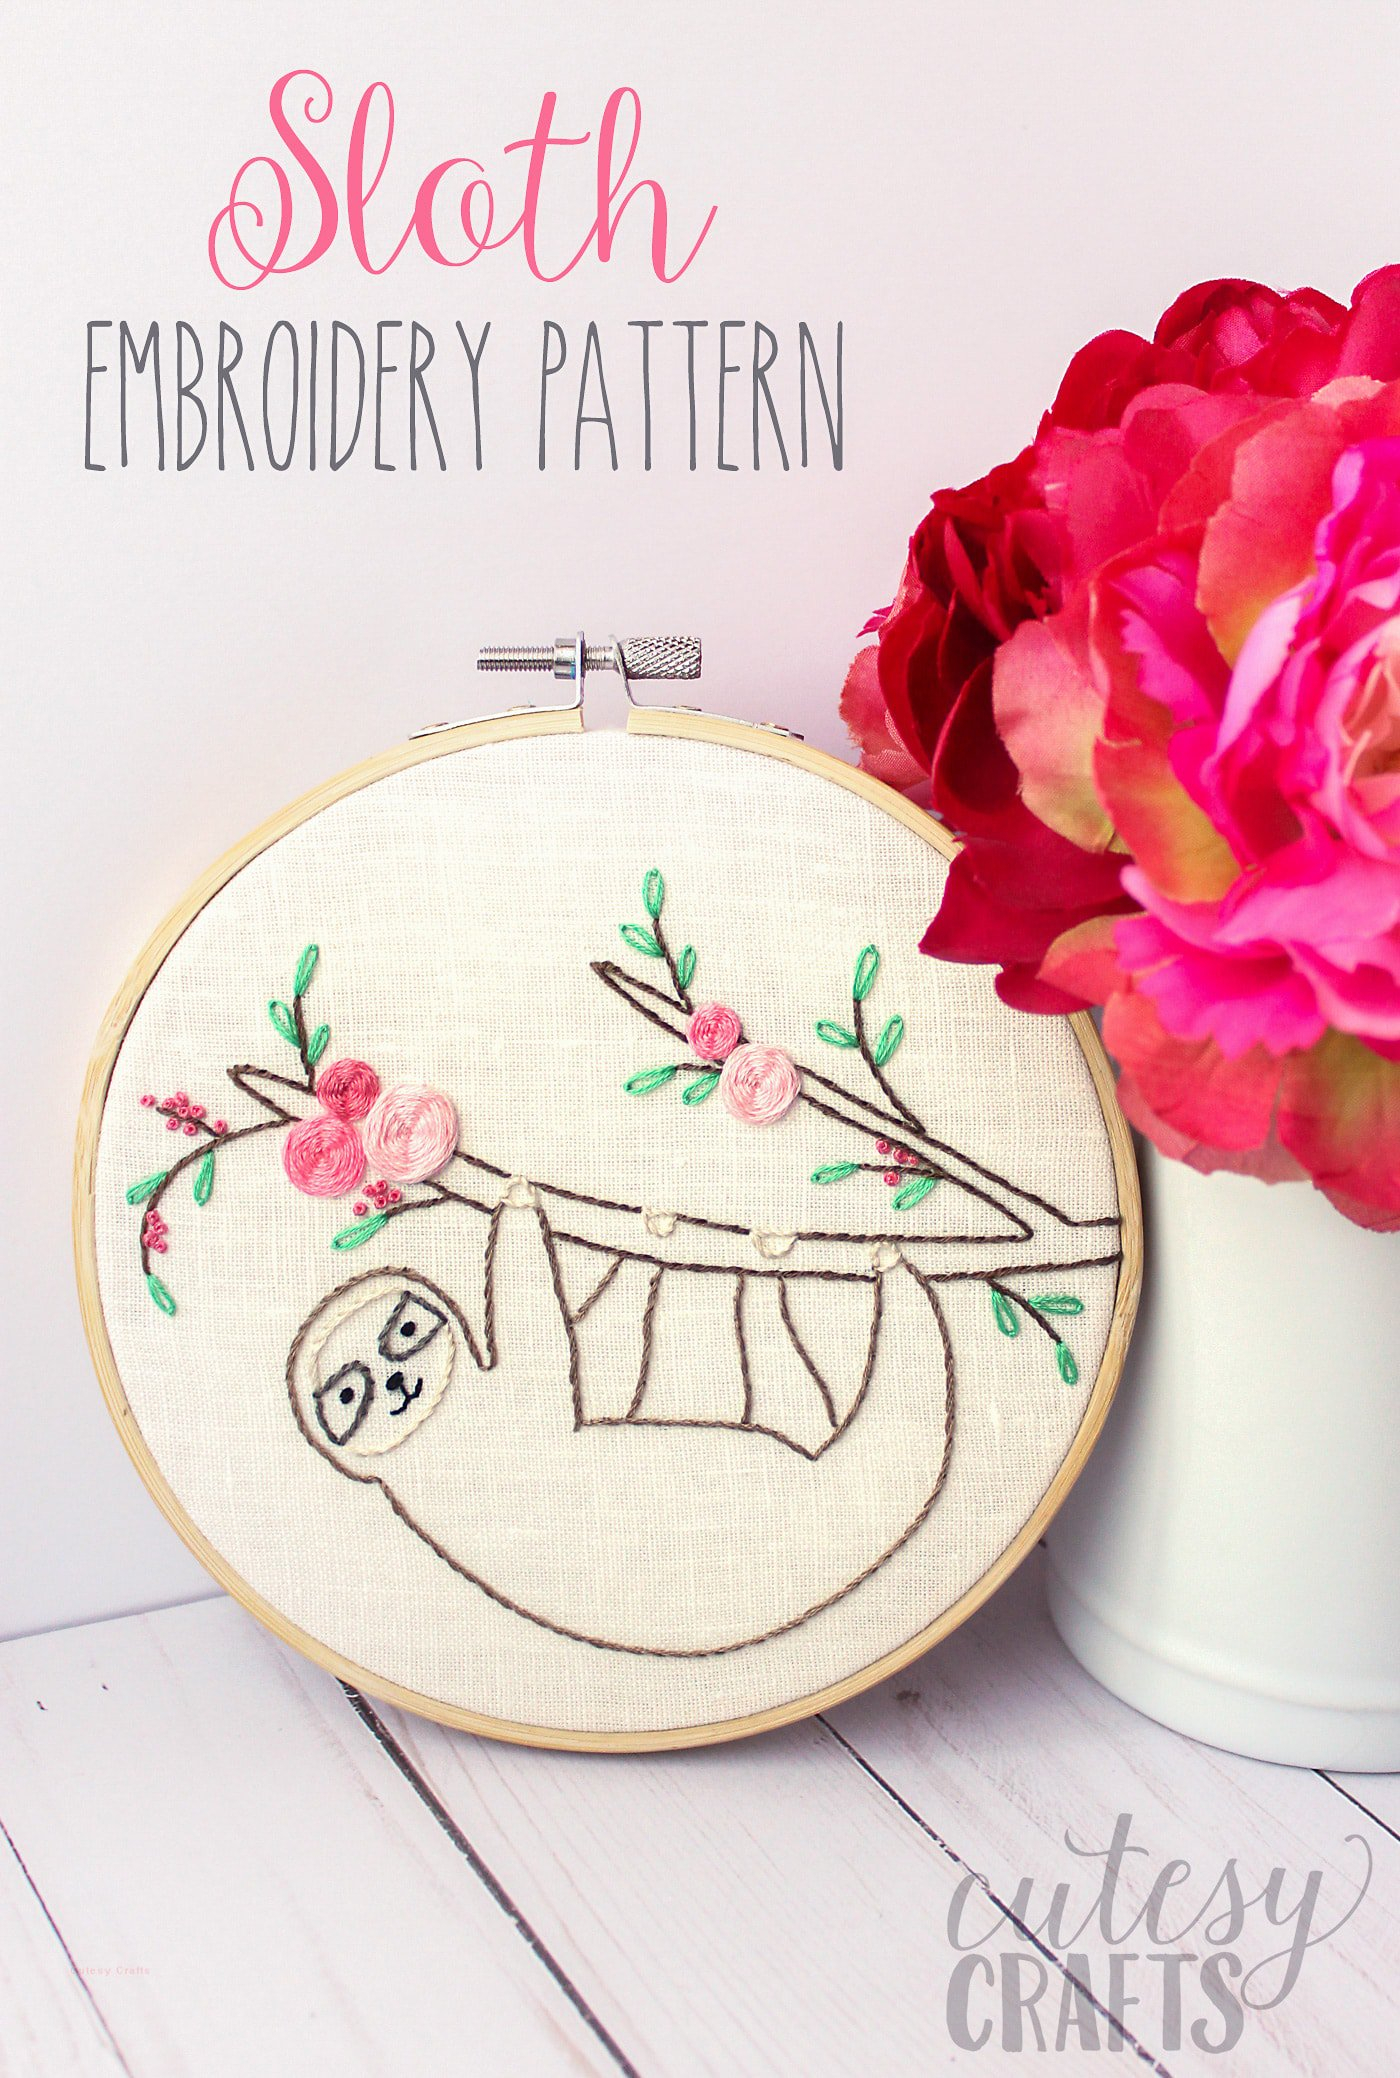 Paper Embroidery Patterns Free Adorable Sloth Hand Embroidery Pattern The Polka Dot Chair